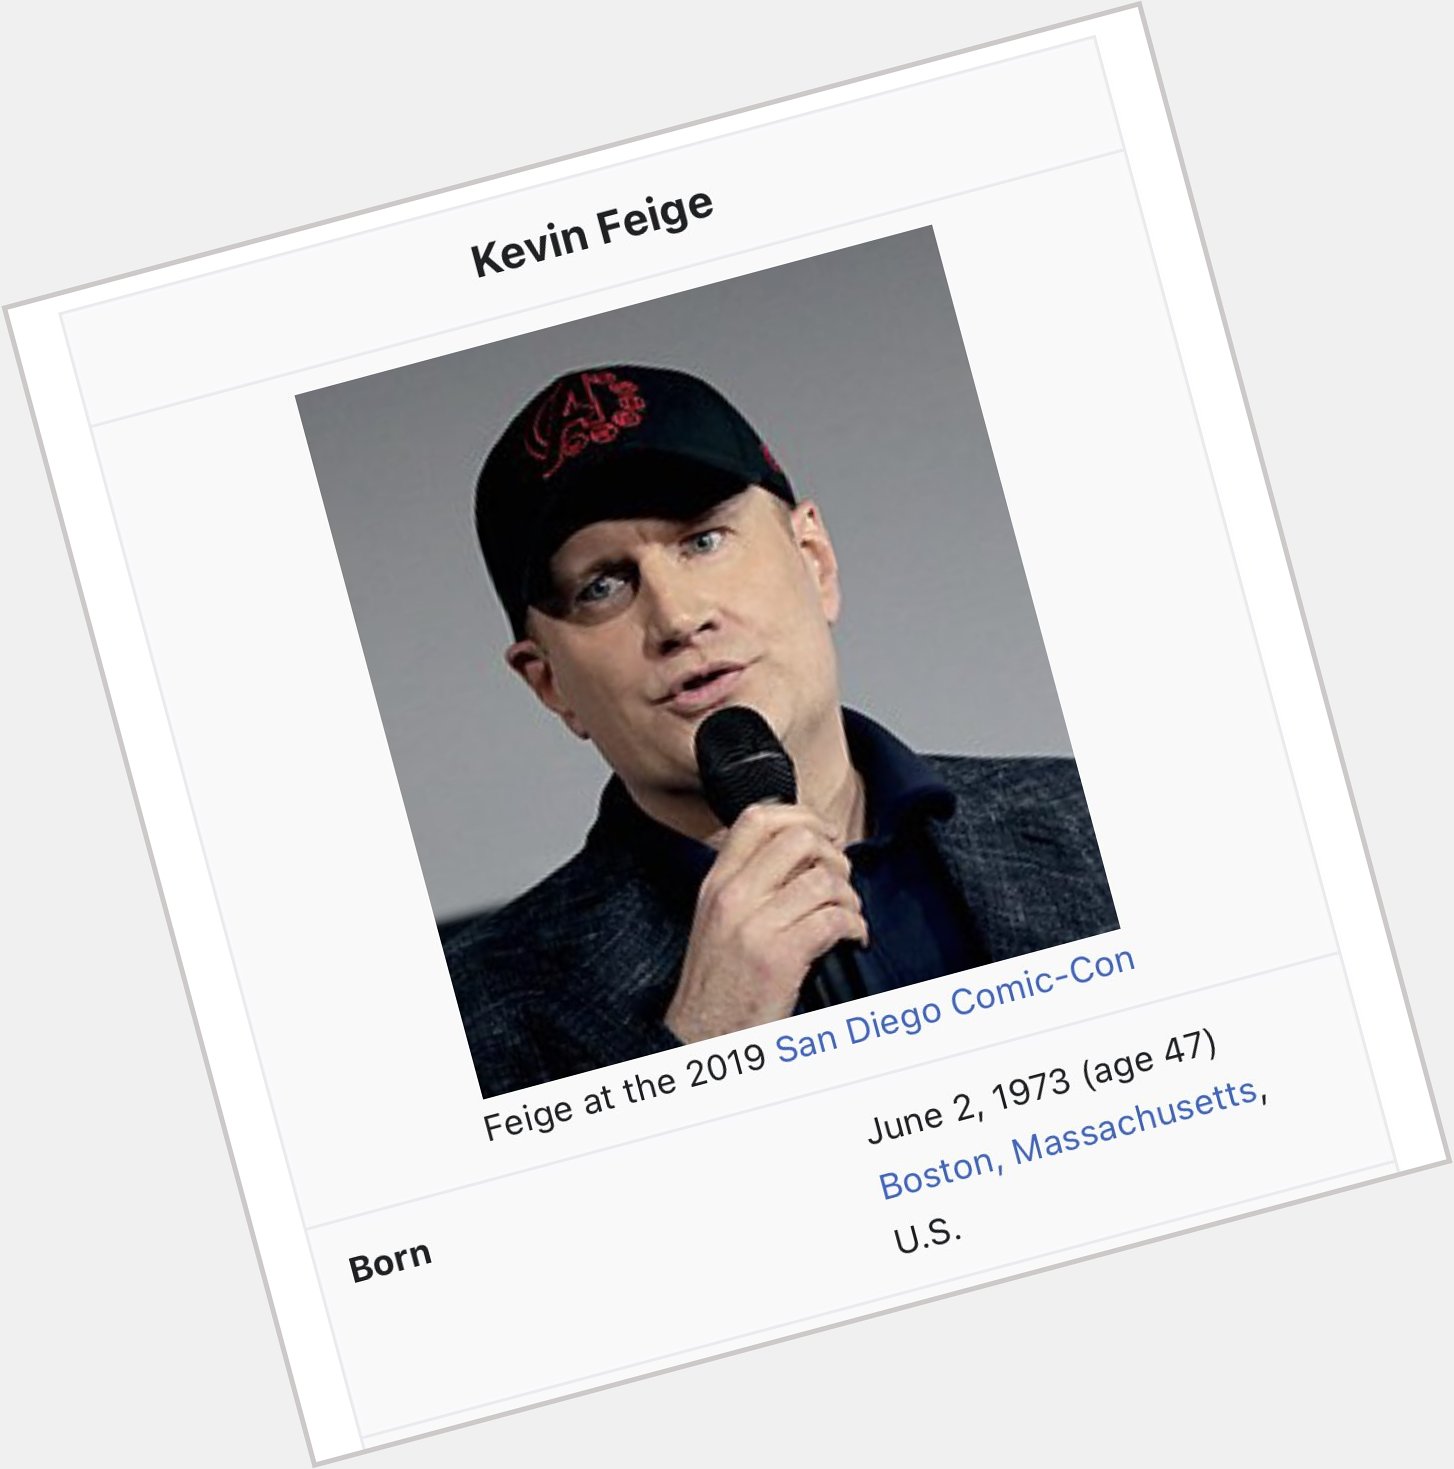 So cool I share a birthday with the absolute genius behind Kevin Feige. Happy birthday to us!  